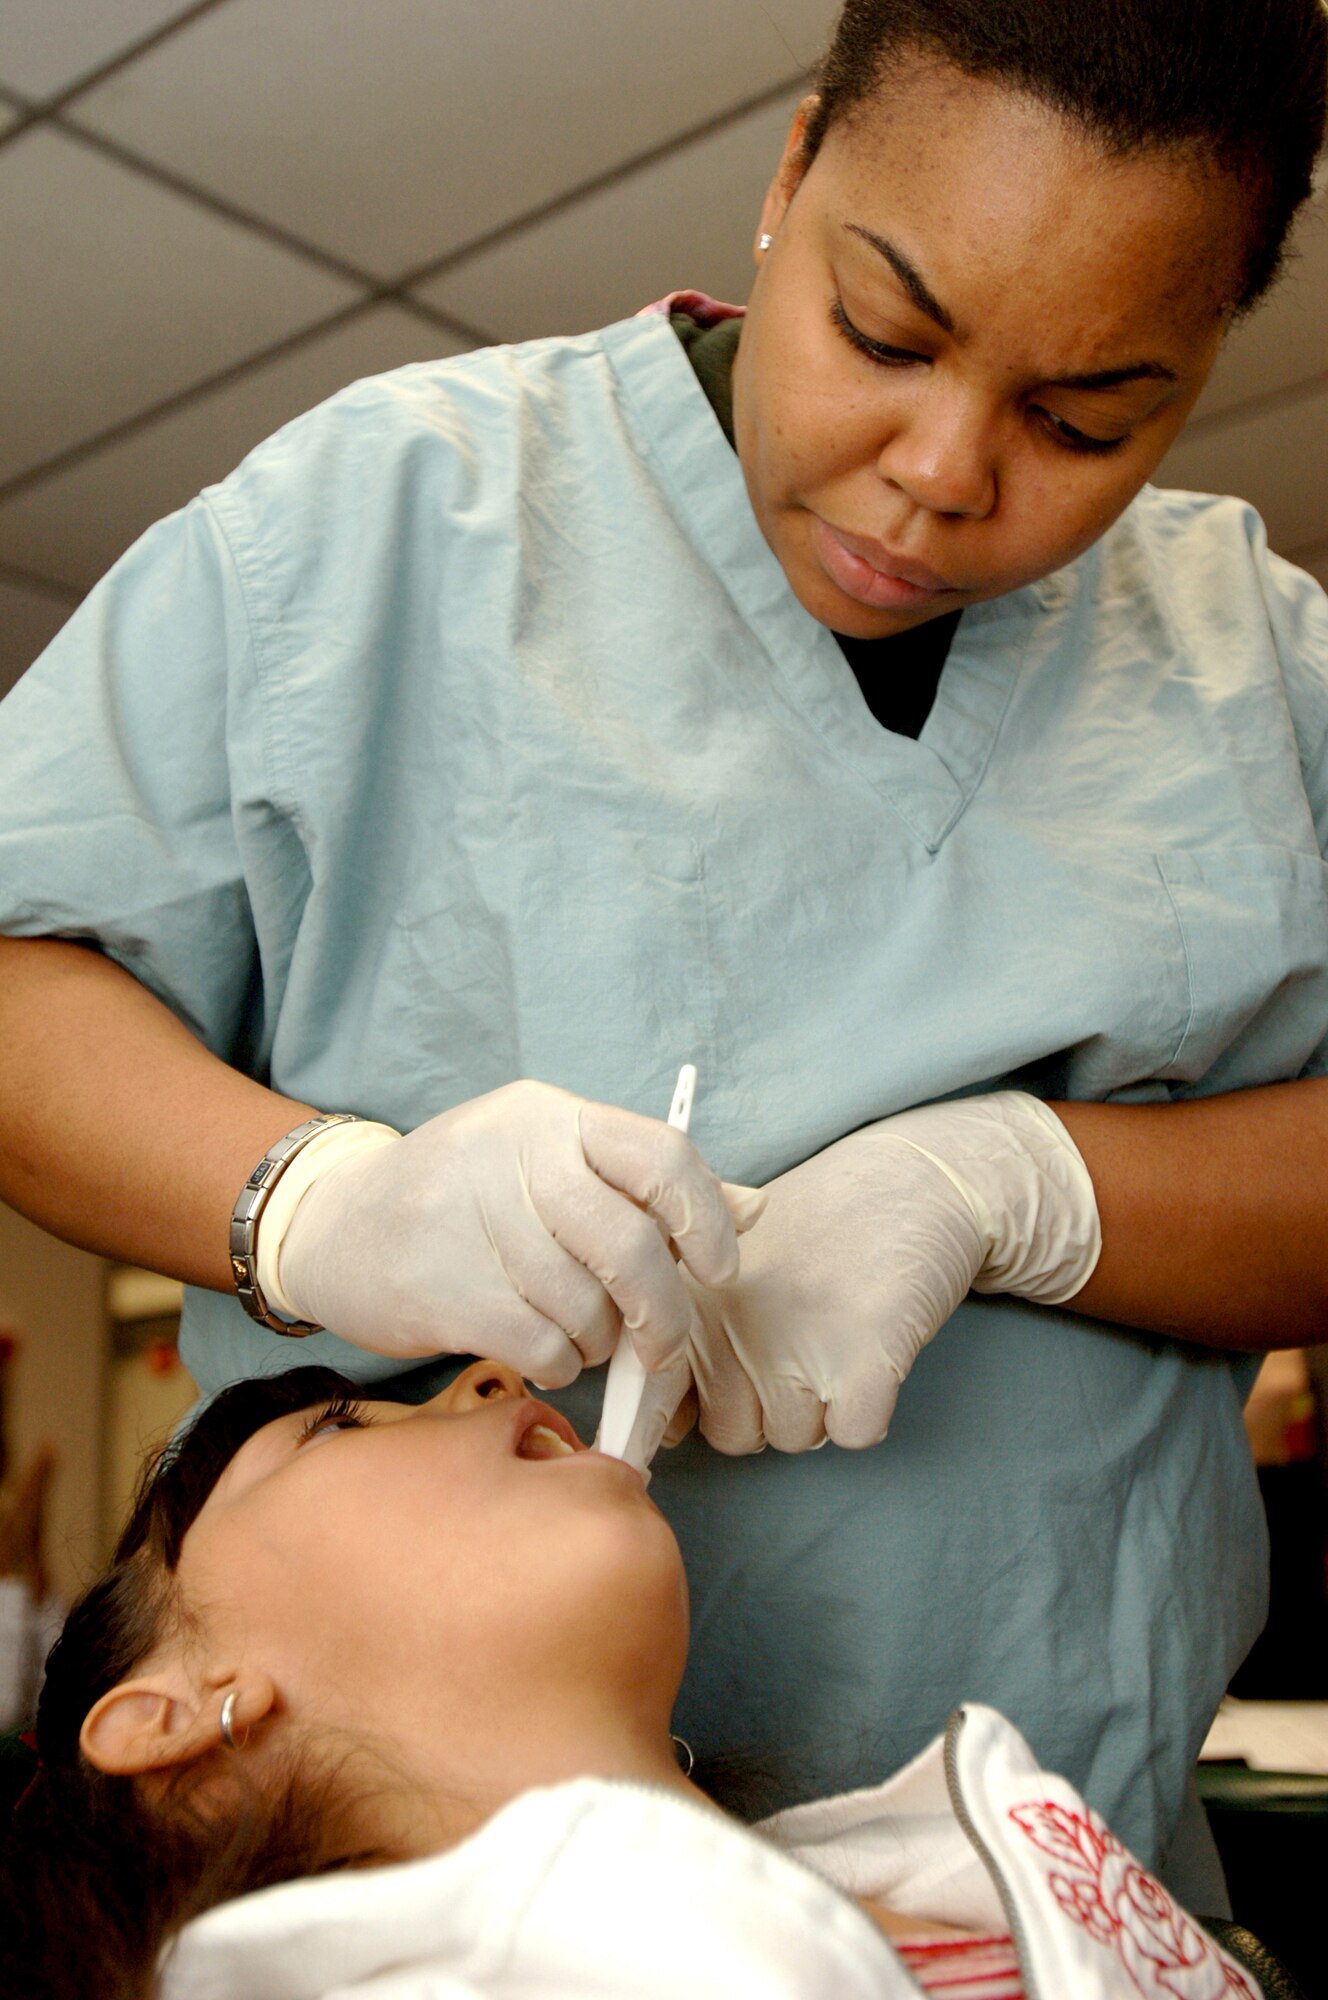 Airman 1st Class Sheryl Dallas, 59th Dental Group dental assistant, examines Destiny Becerra at the drop-in dental clinic on Joint Base San Antonio-Lackland. (U.S. Air Force photo by Senior Airman Erin Peterson)